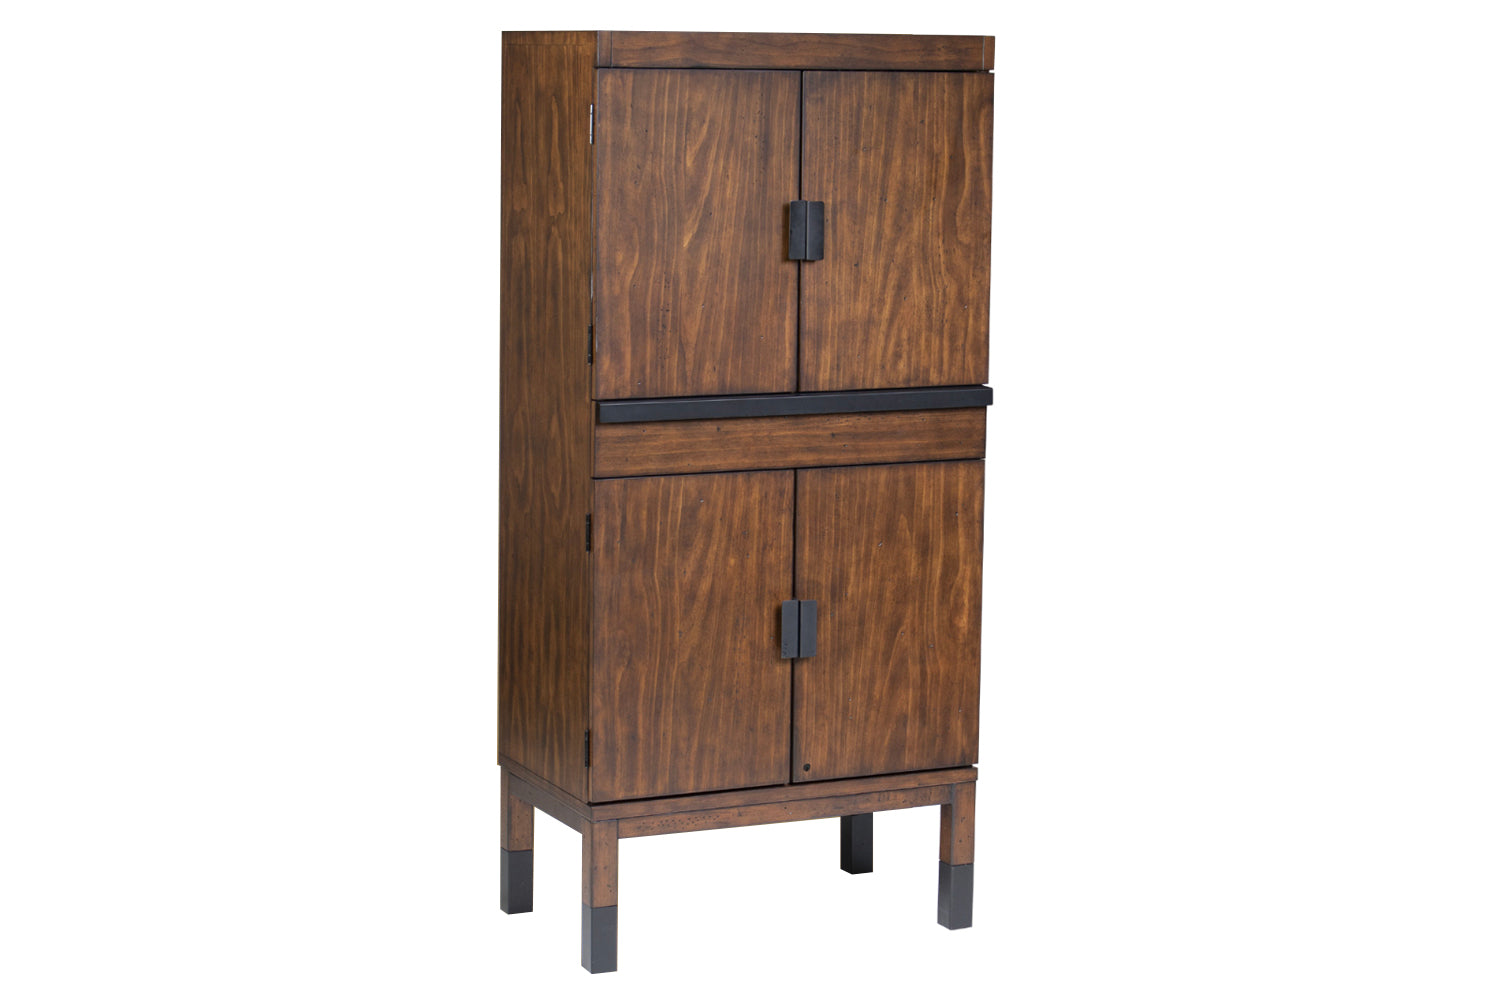 Harpeth Bar Cabinet with Doors Closed